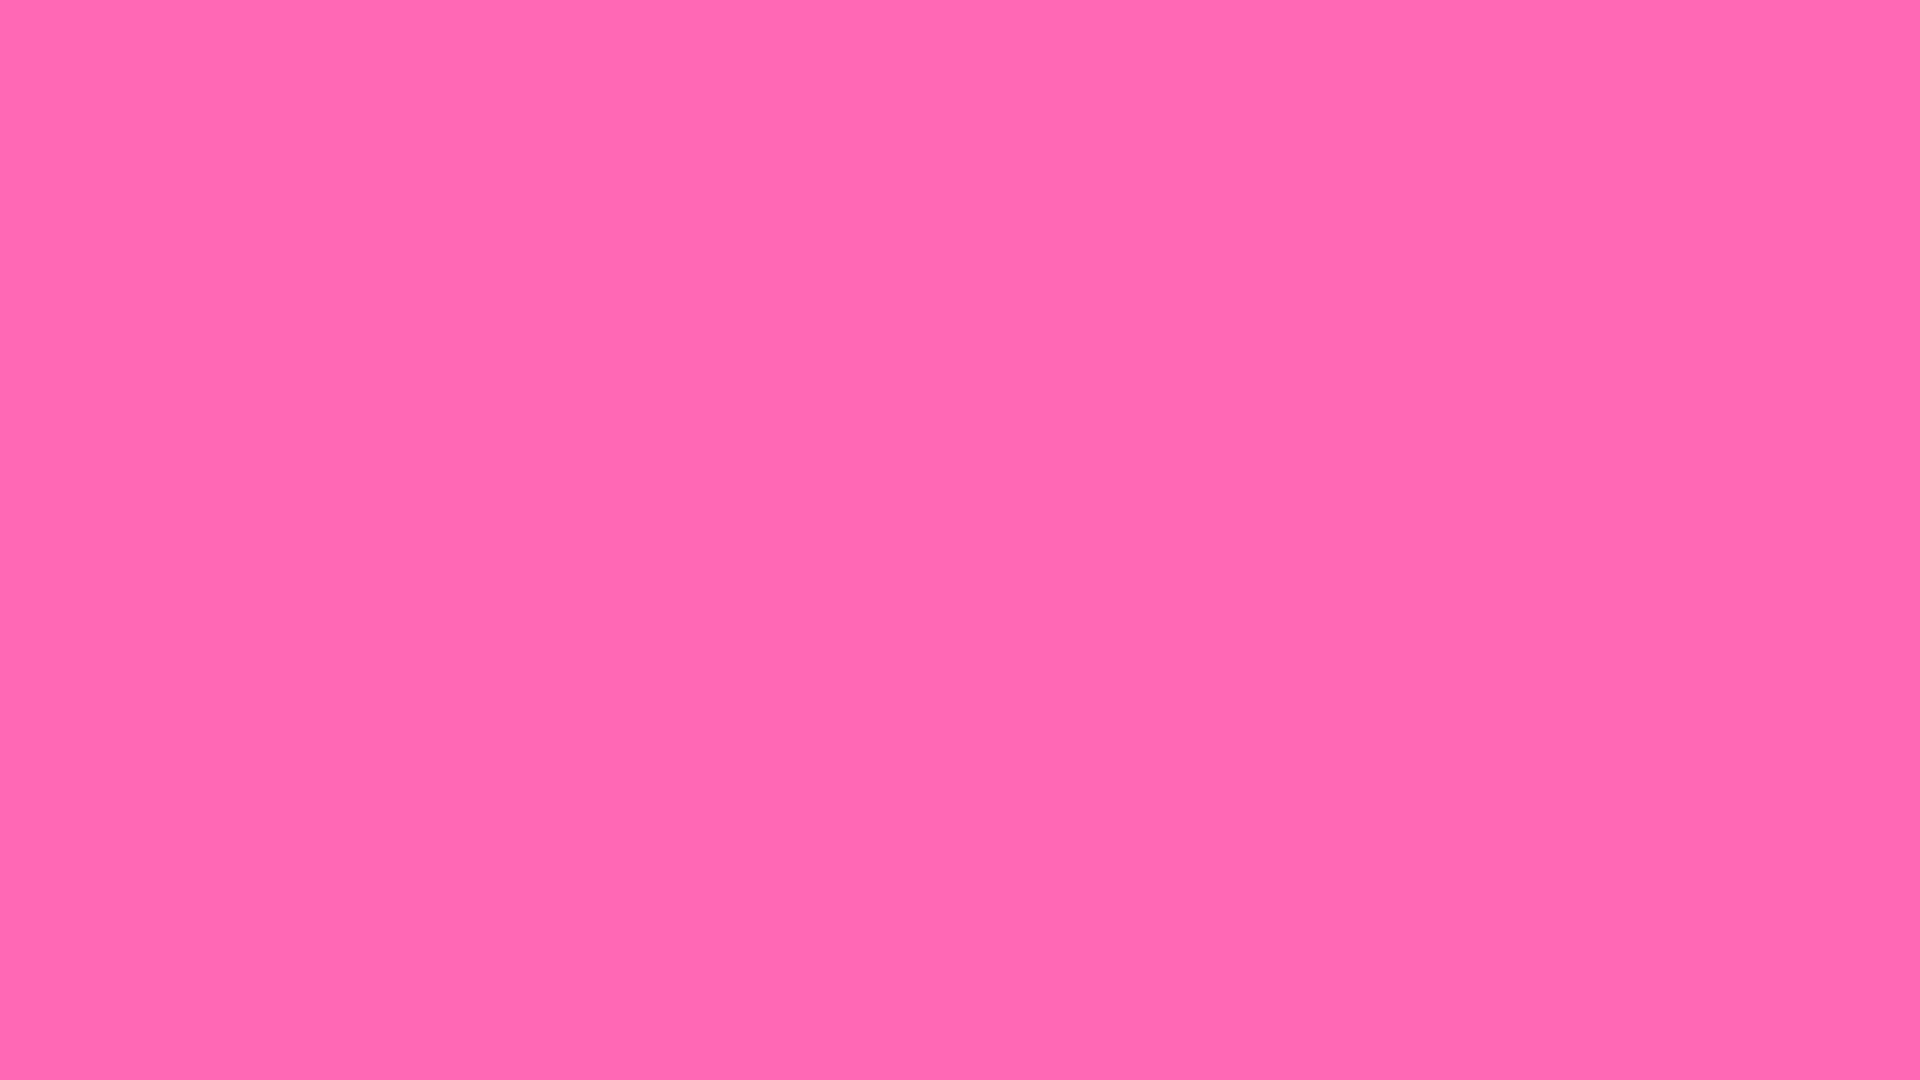 Hot Pink, High Definition, High Quality, Widescreen